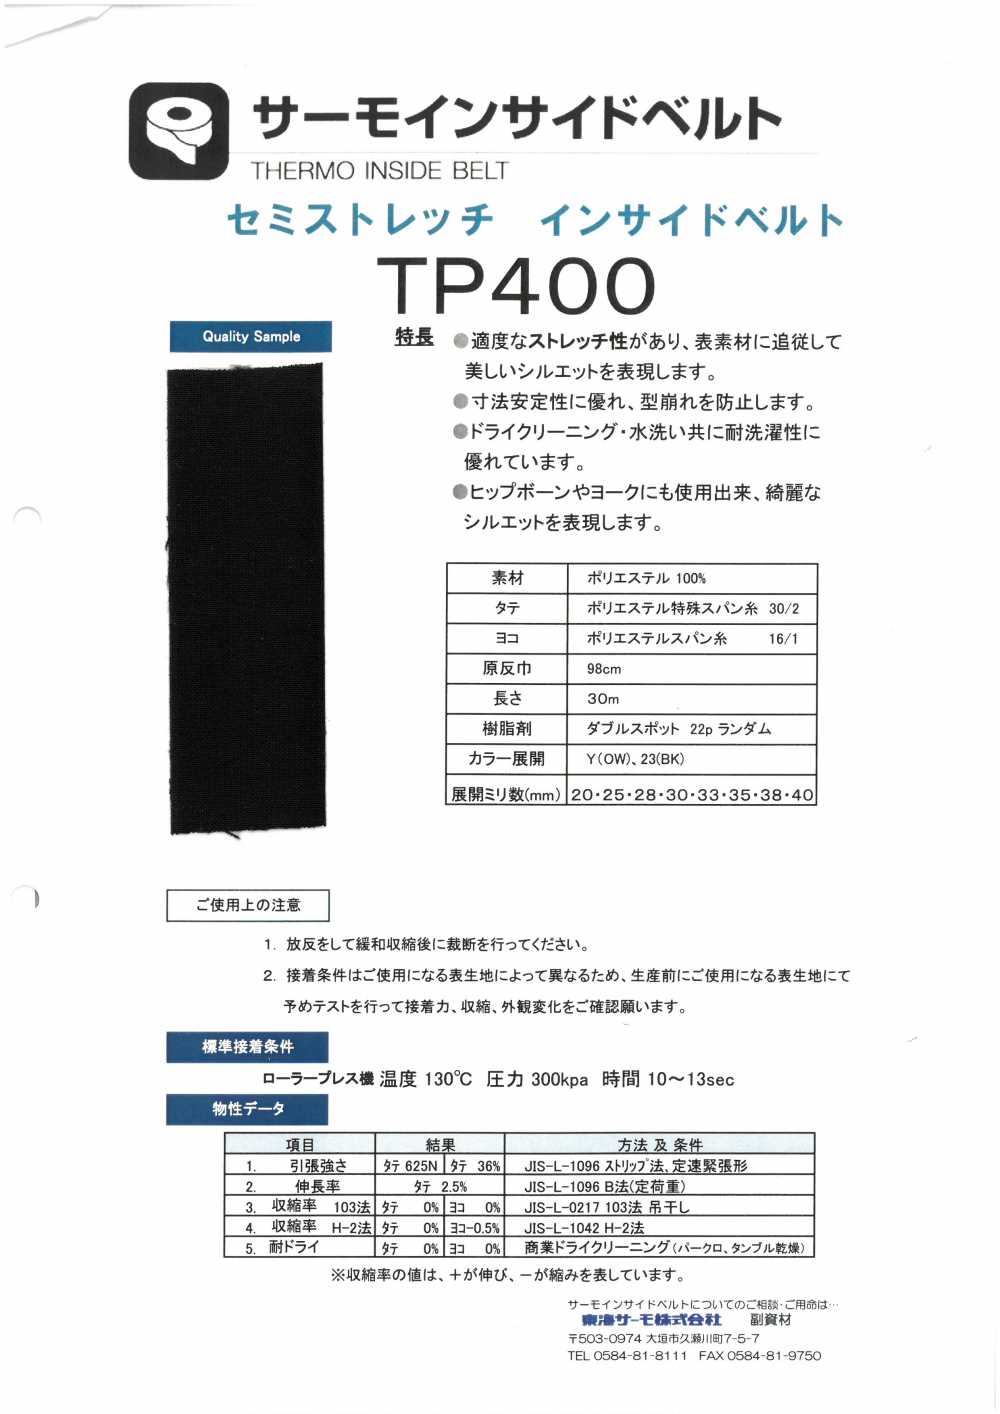 TP400 热内带[衬布] 东海Thermo（Thermo）